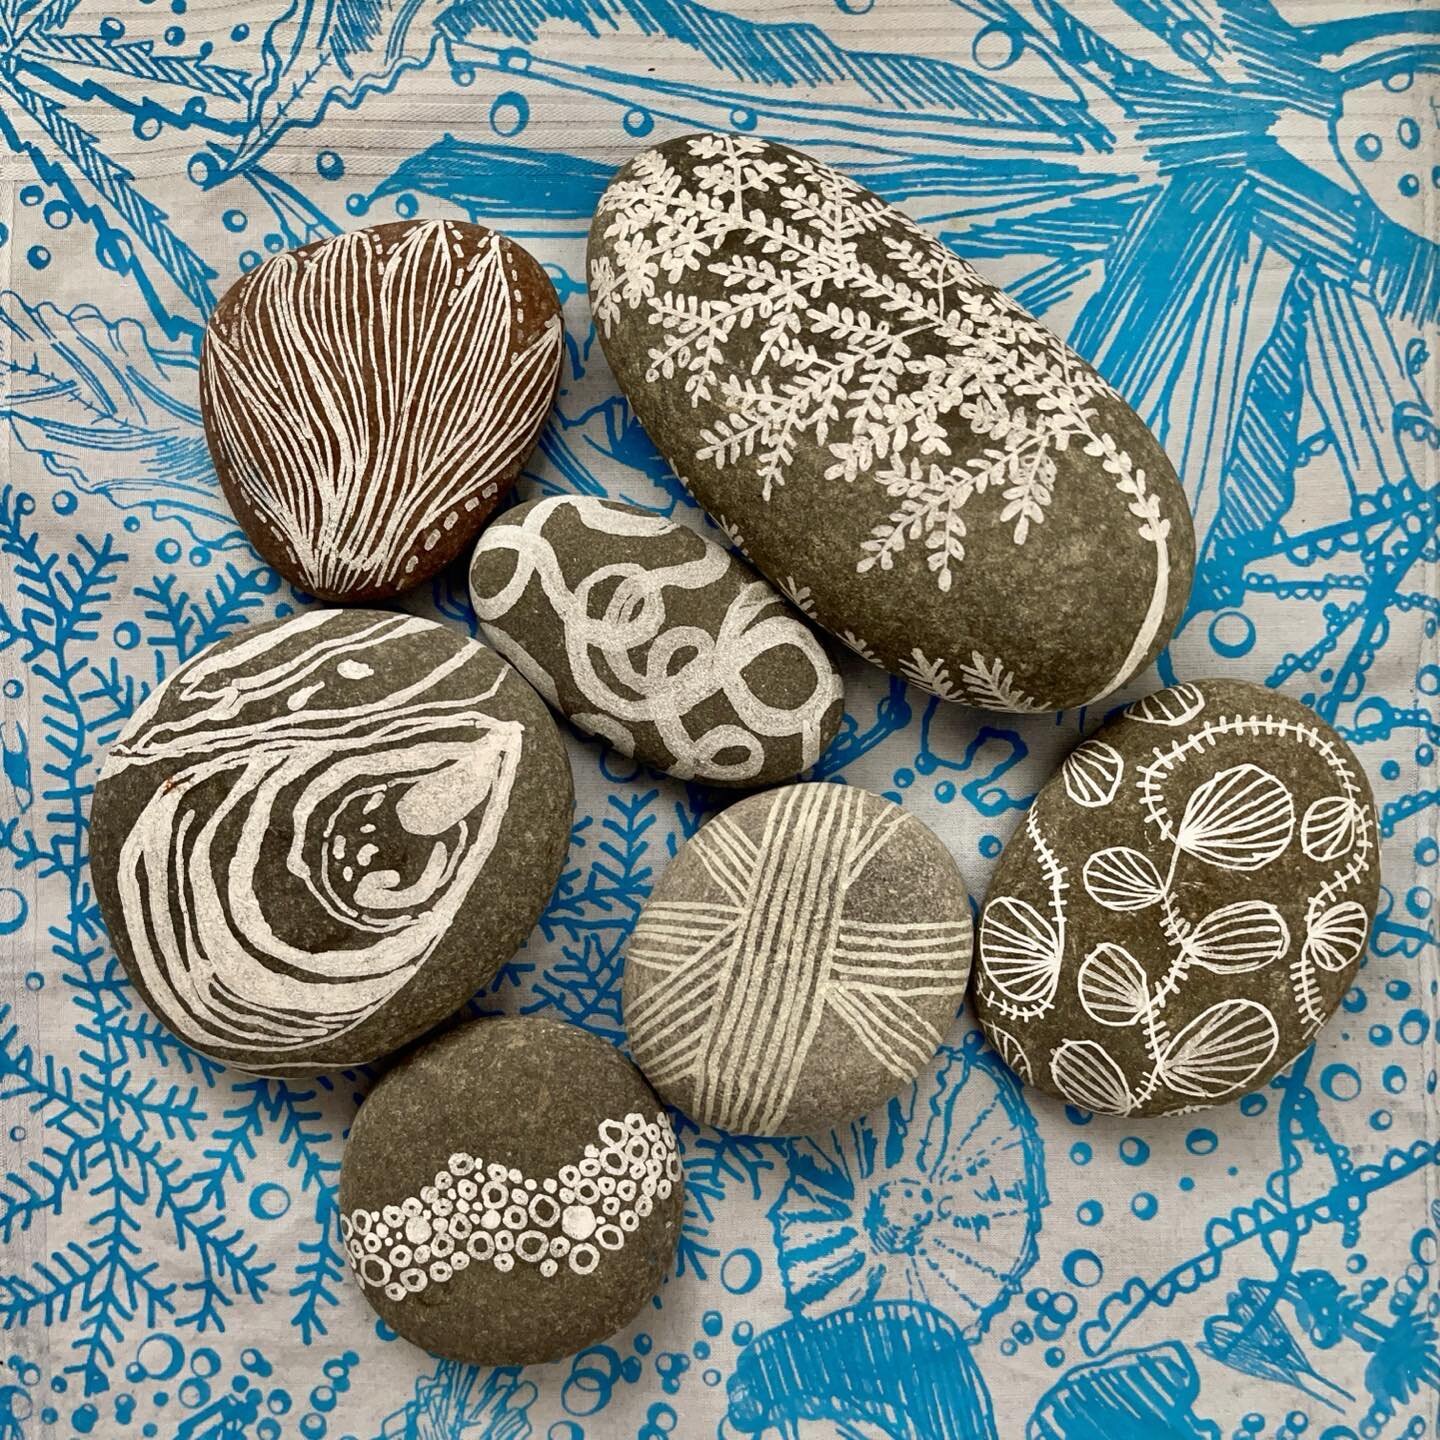 Here are some pebbles that I painted with items that I found beach combing. They are sitting a top one of my man sized hankies which are screen printed by me with my seaweed designs.